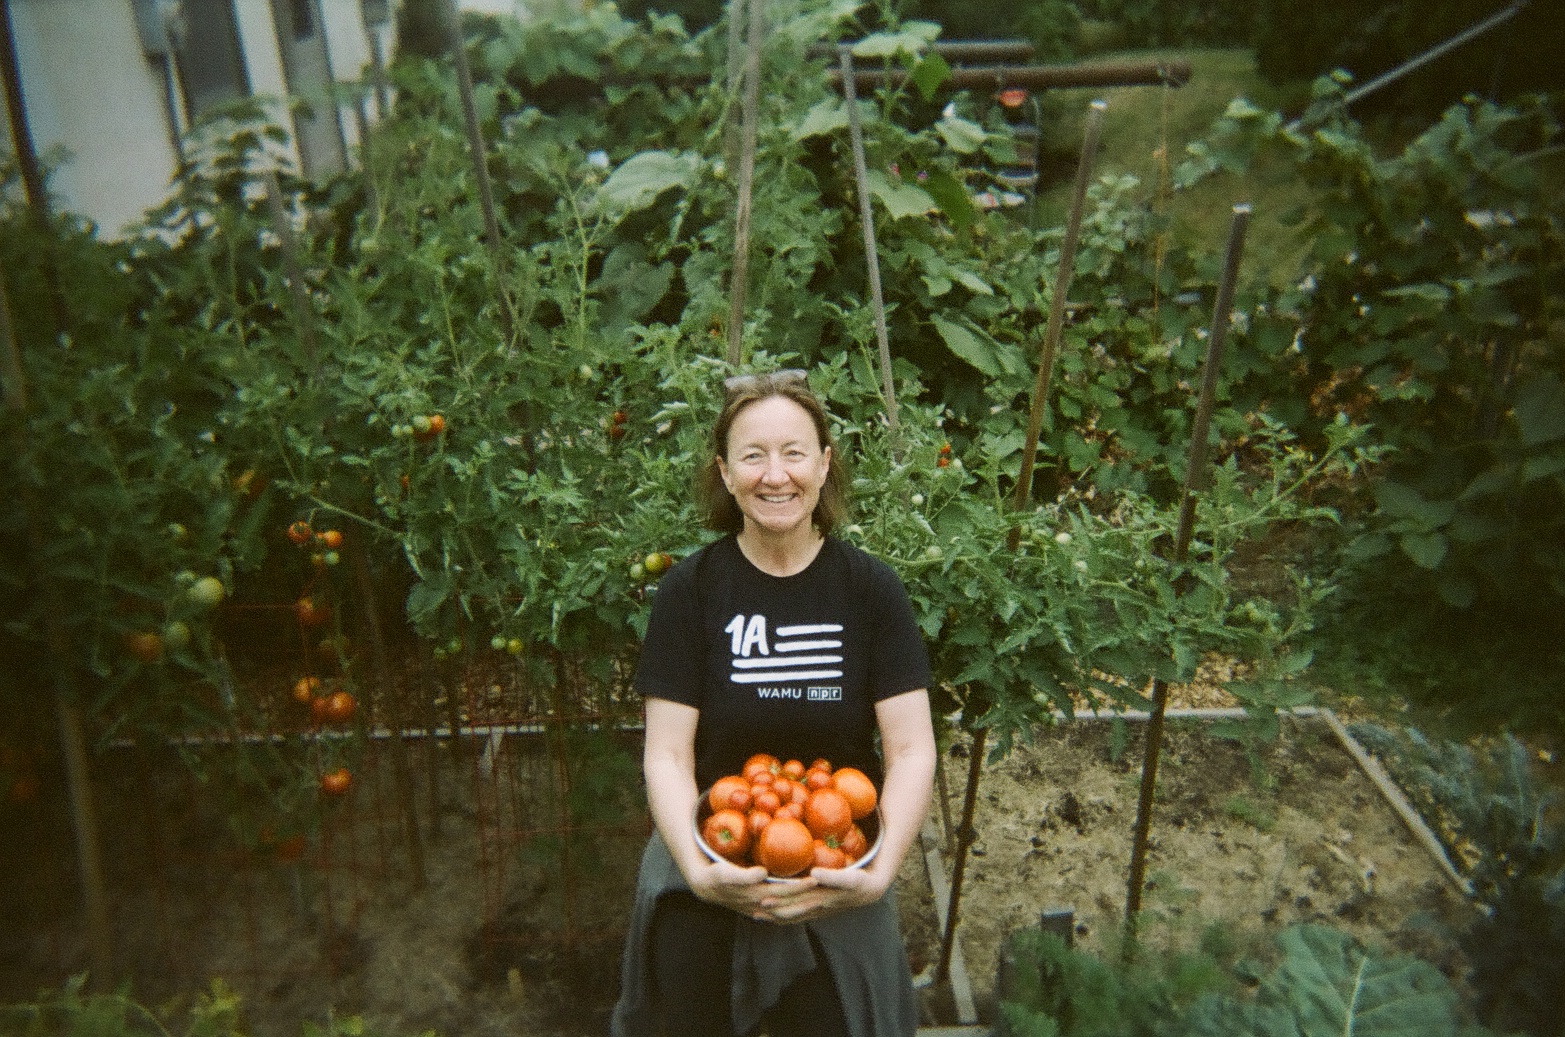 Person with light skin holds basket of tomatoes in her arms and smiles at the camera, with tall tomato plants behind her.